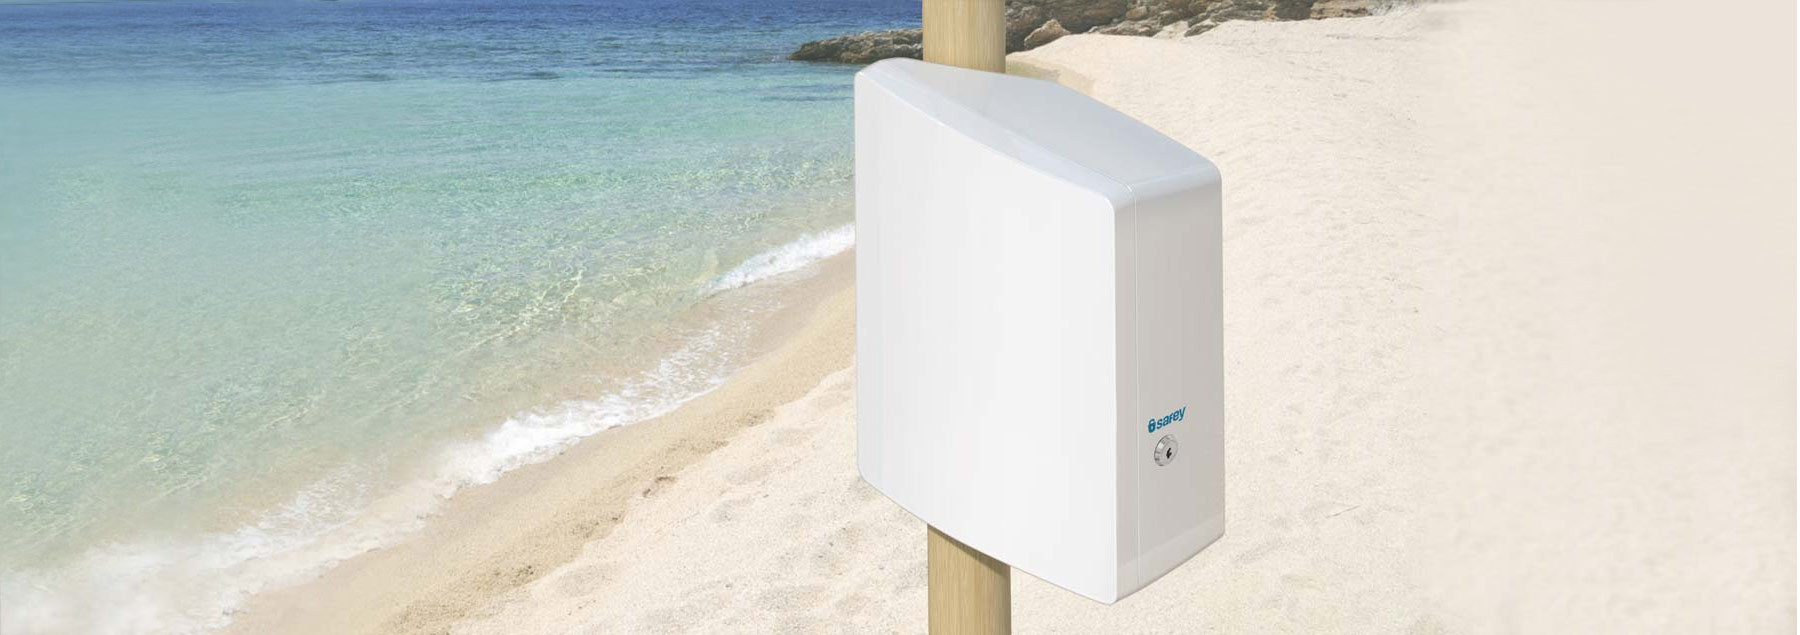 Safey safety box security solution for beach and pool